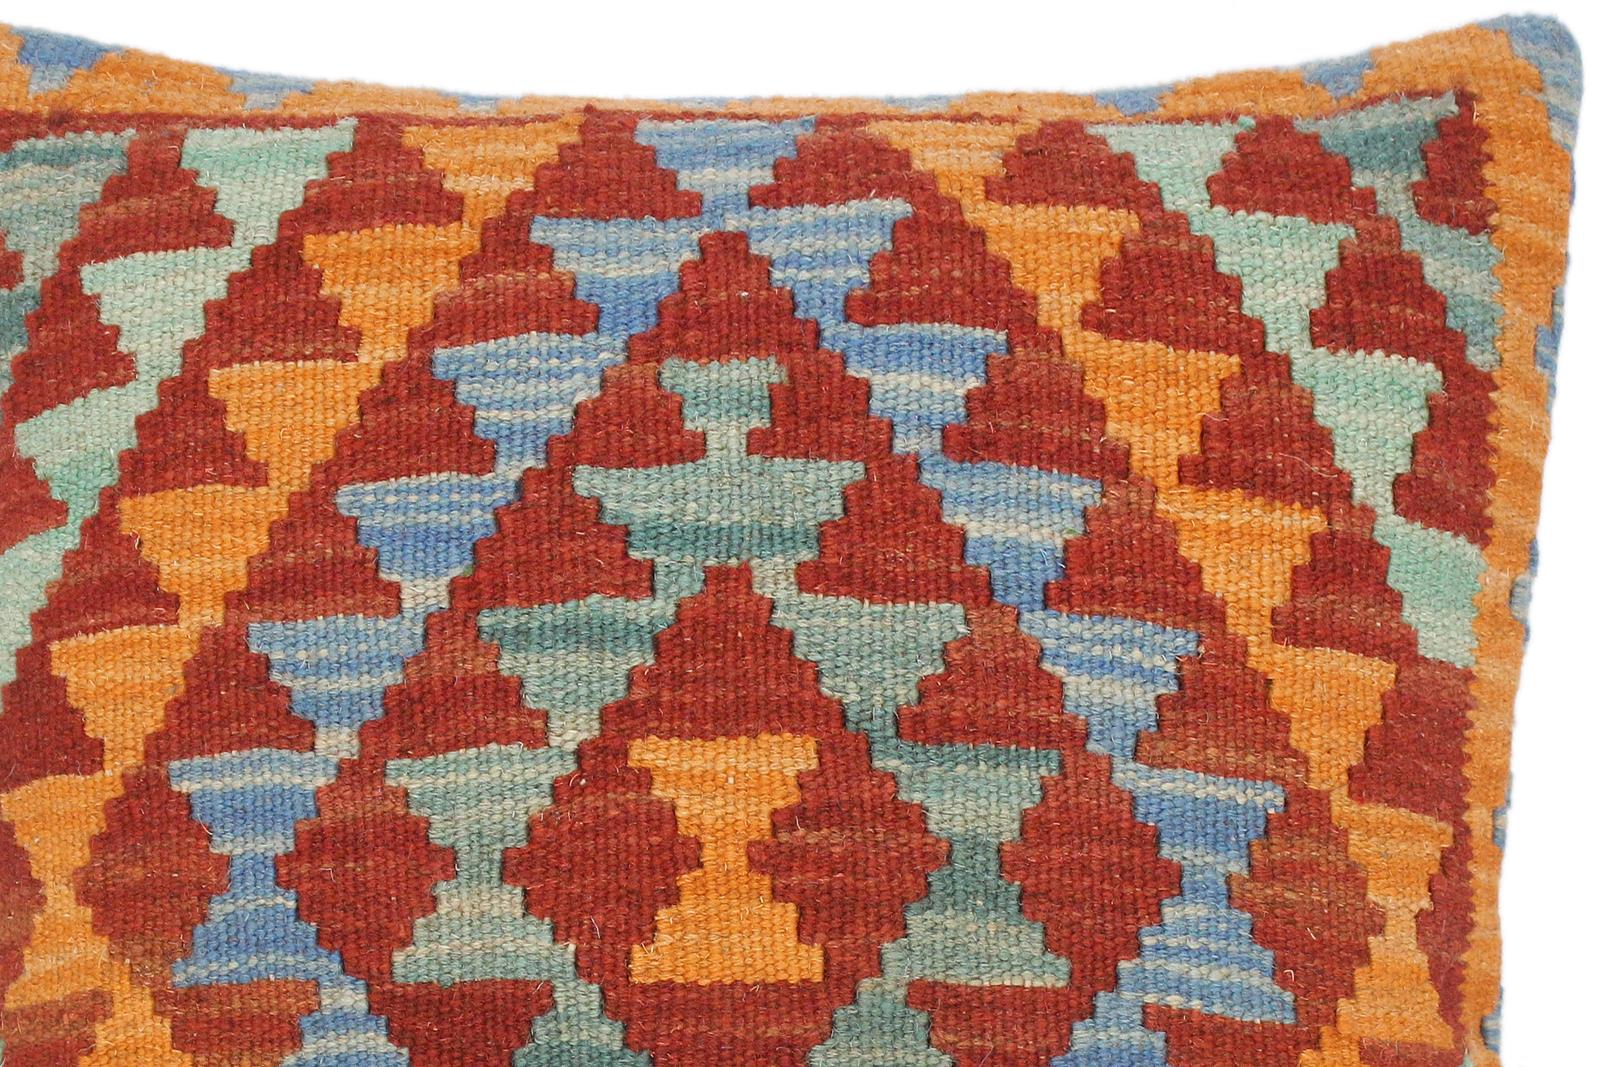 handmade Traditional Pillow Orange Brown Hand-Woven SQUARE 100% WOOL area rug